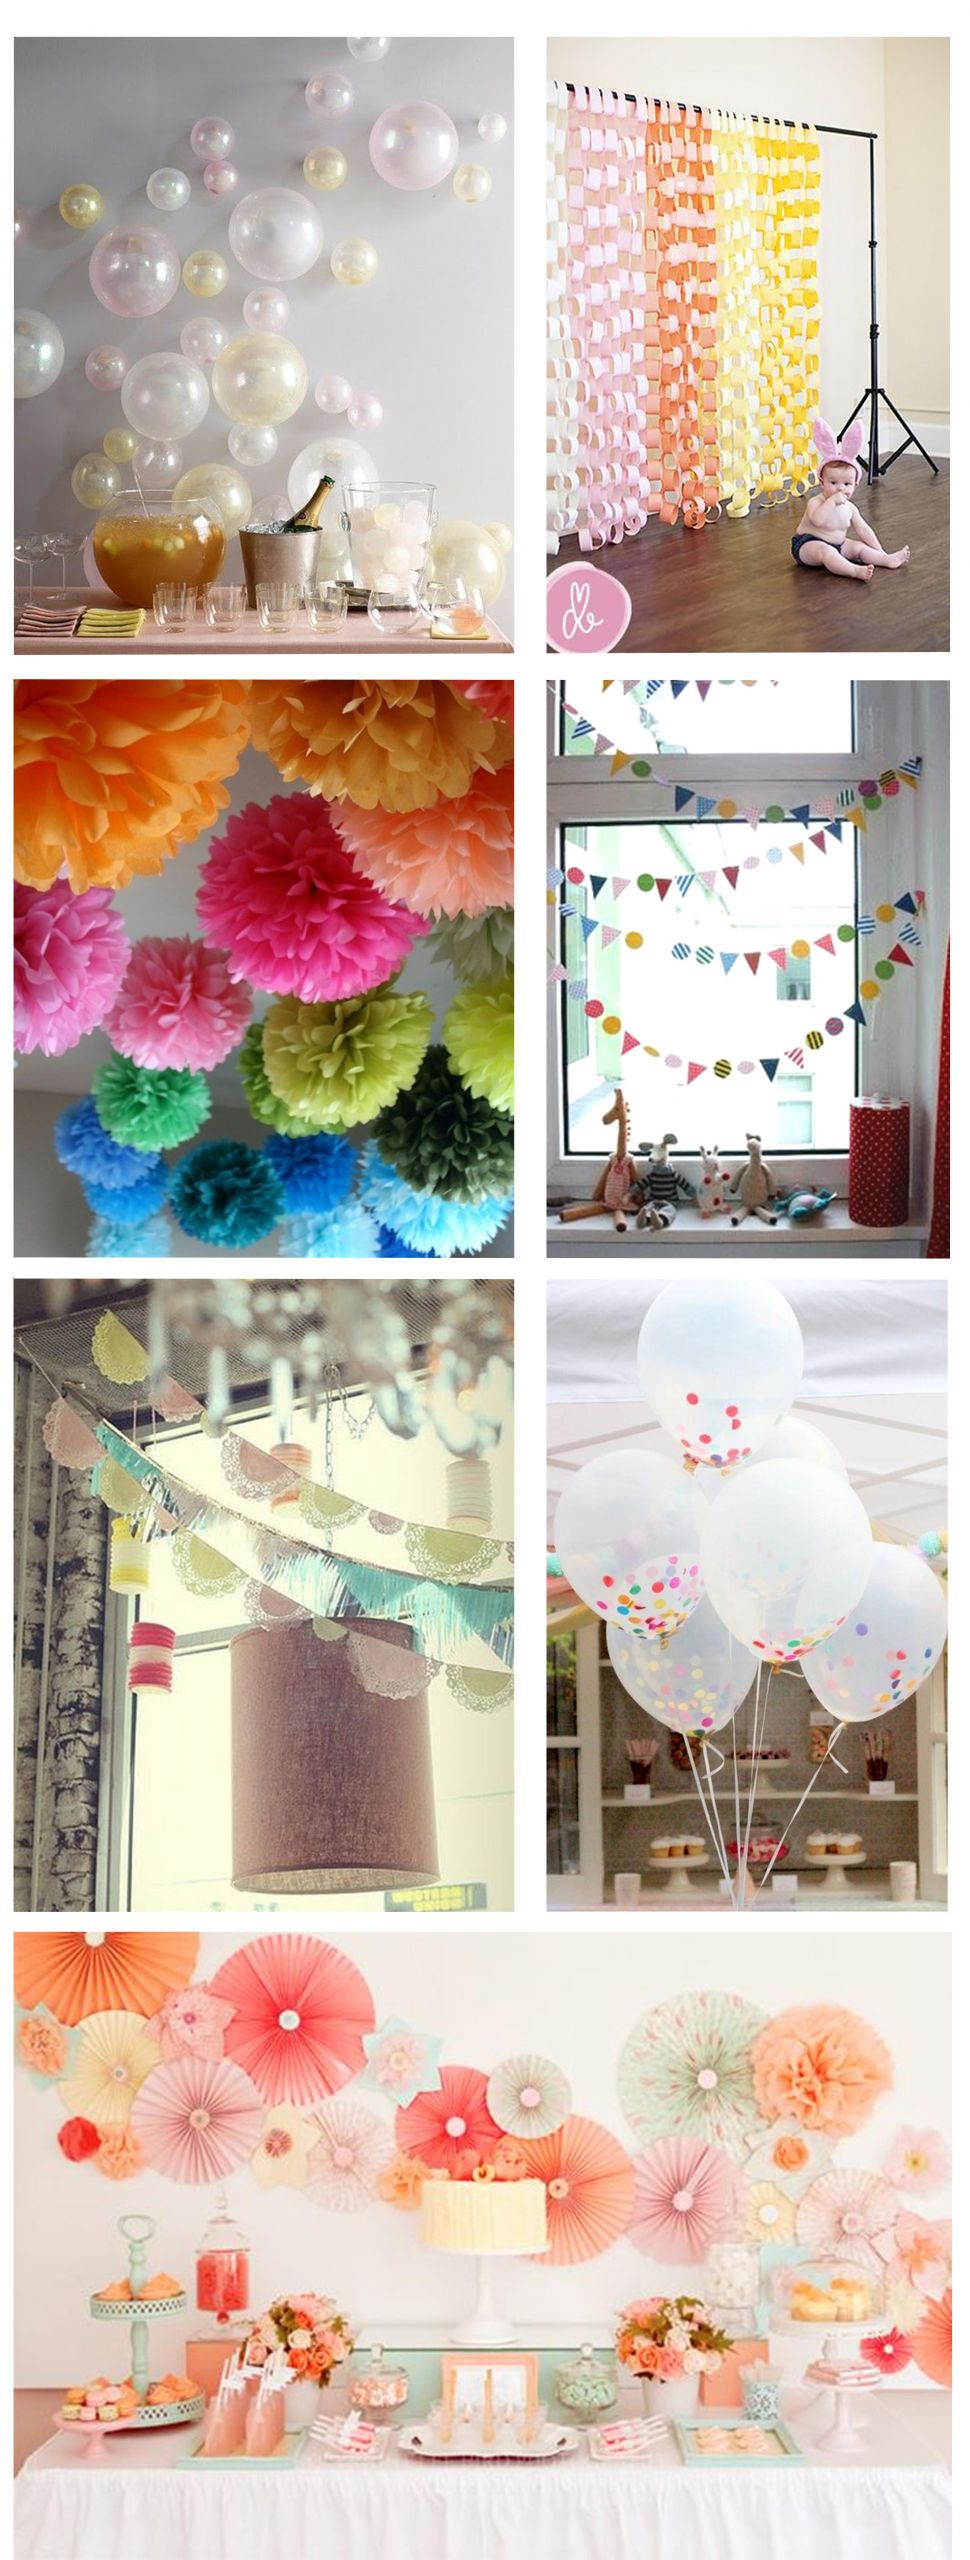 DIY Birthday Decorations
 Ideas for home made party decorations